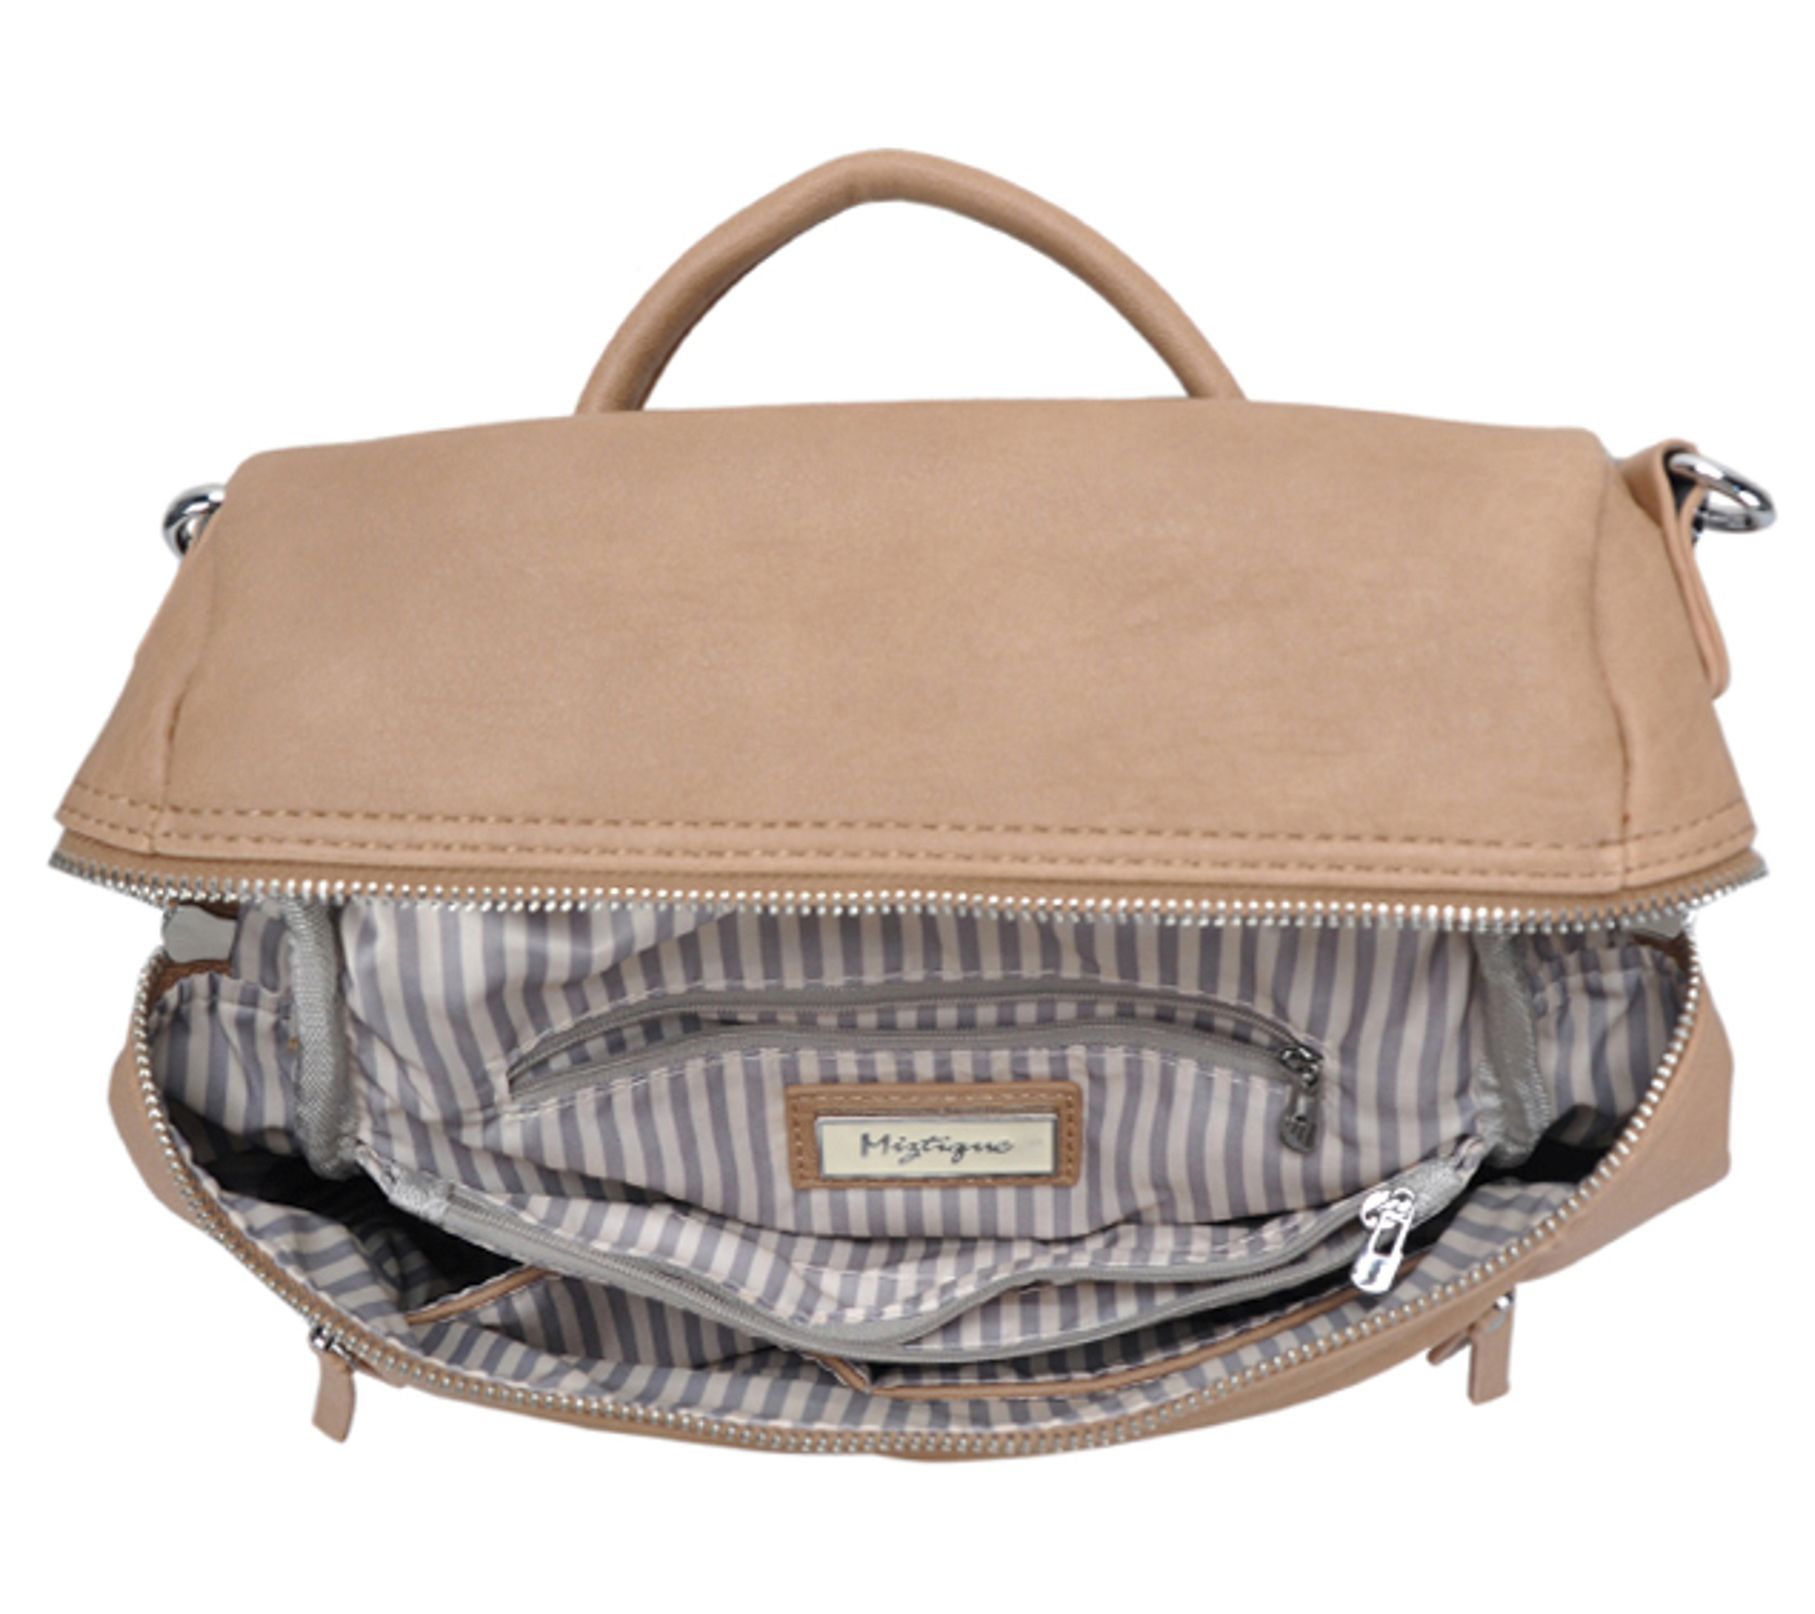 Miztique - The Sienna Backpack 